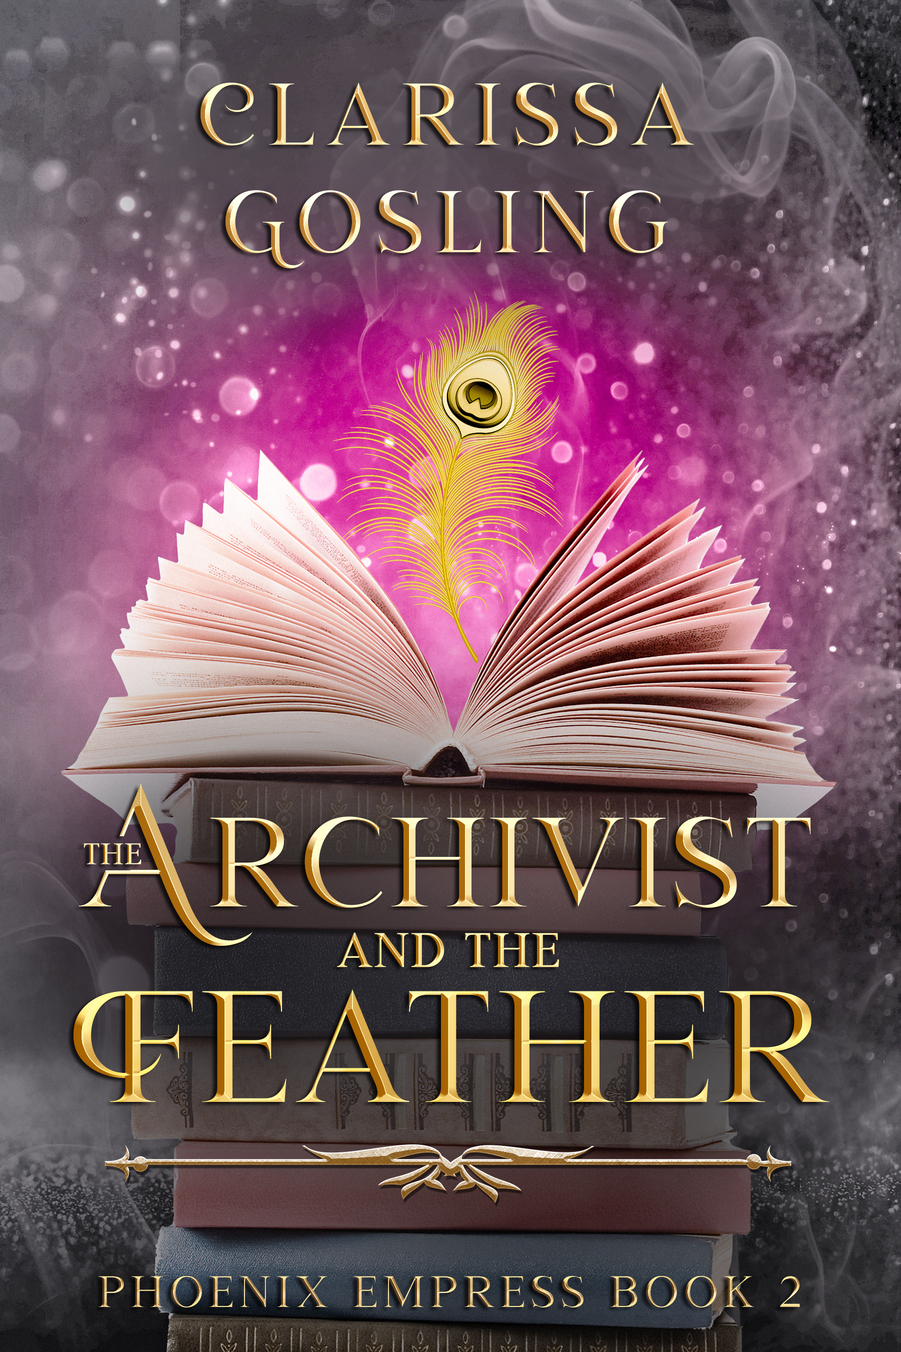 Cover image for The Archivist and the Feather by Clarissa Gosling